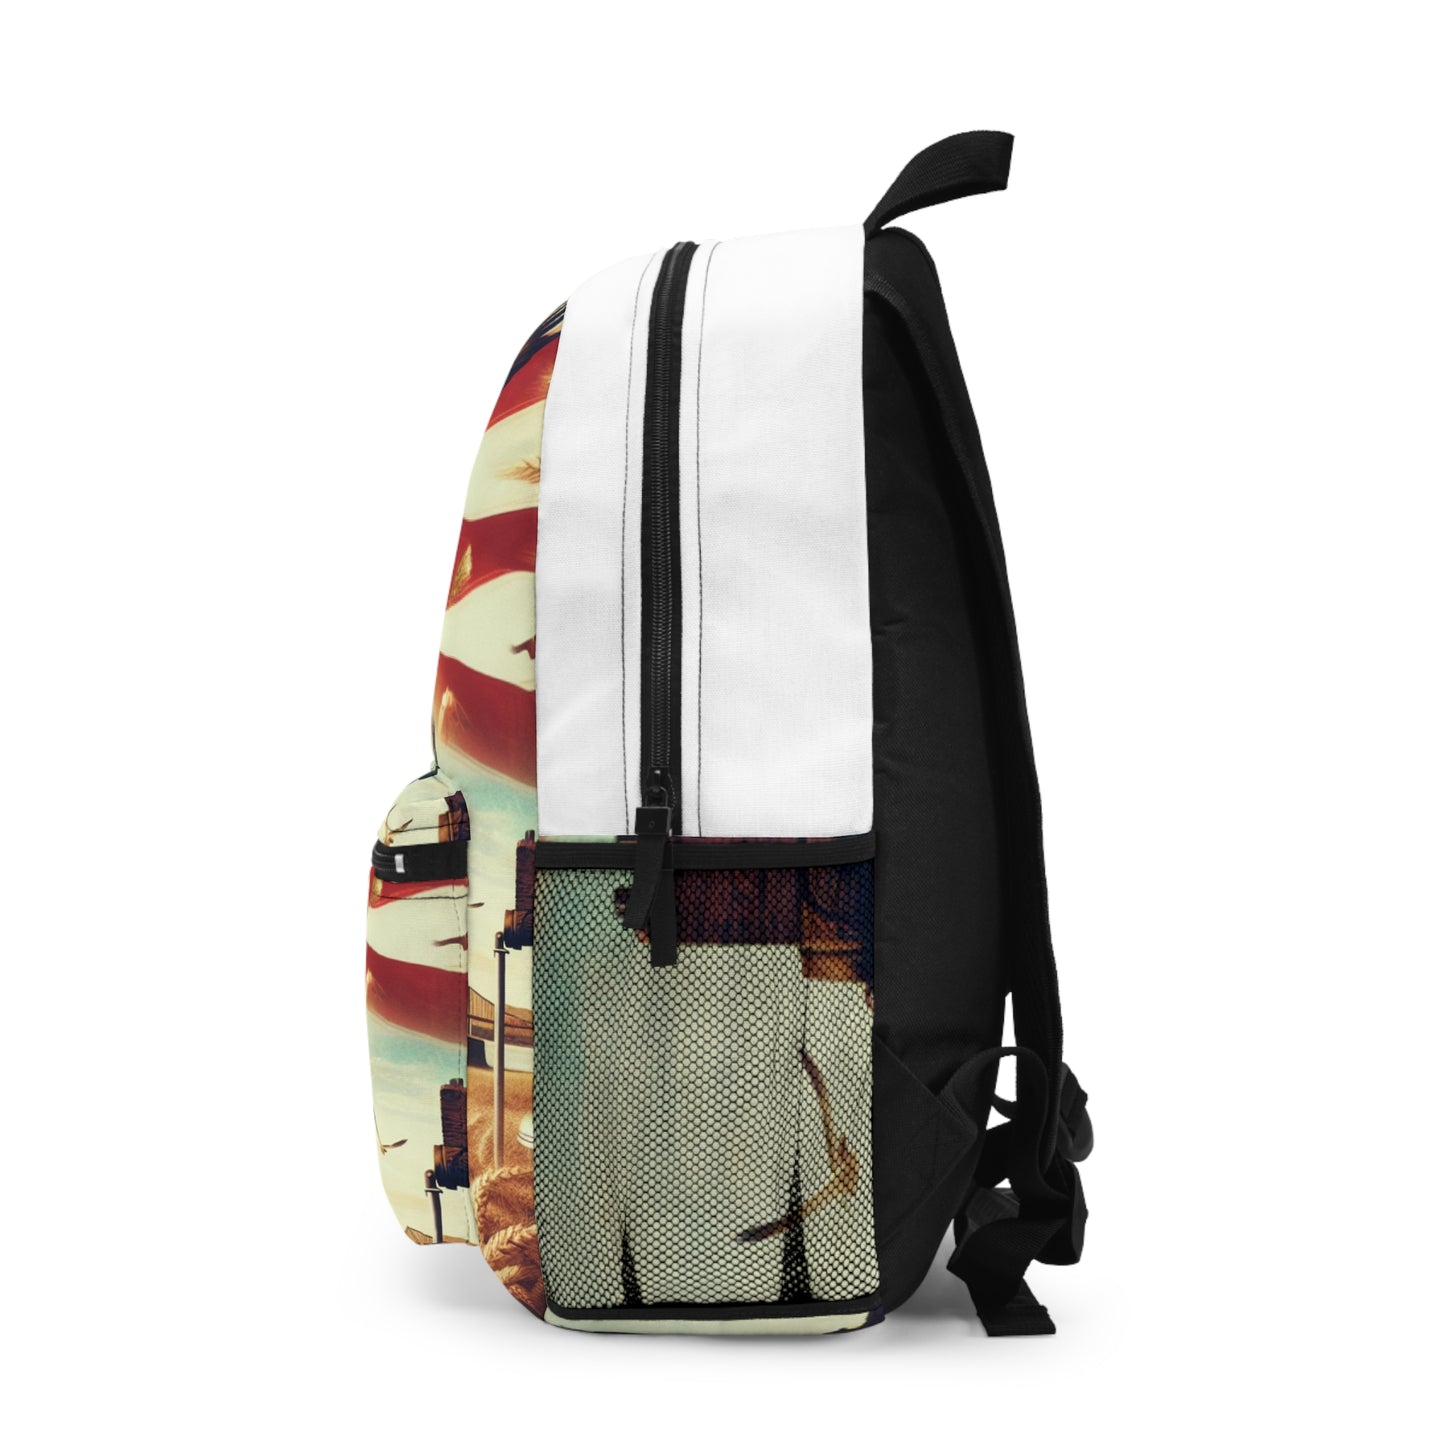 Tipper Williams - Backpack